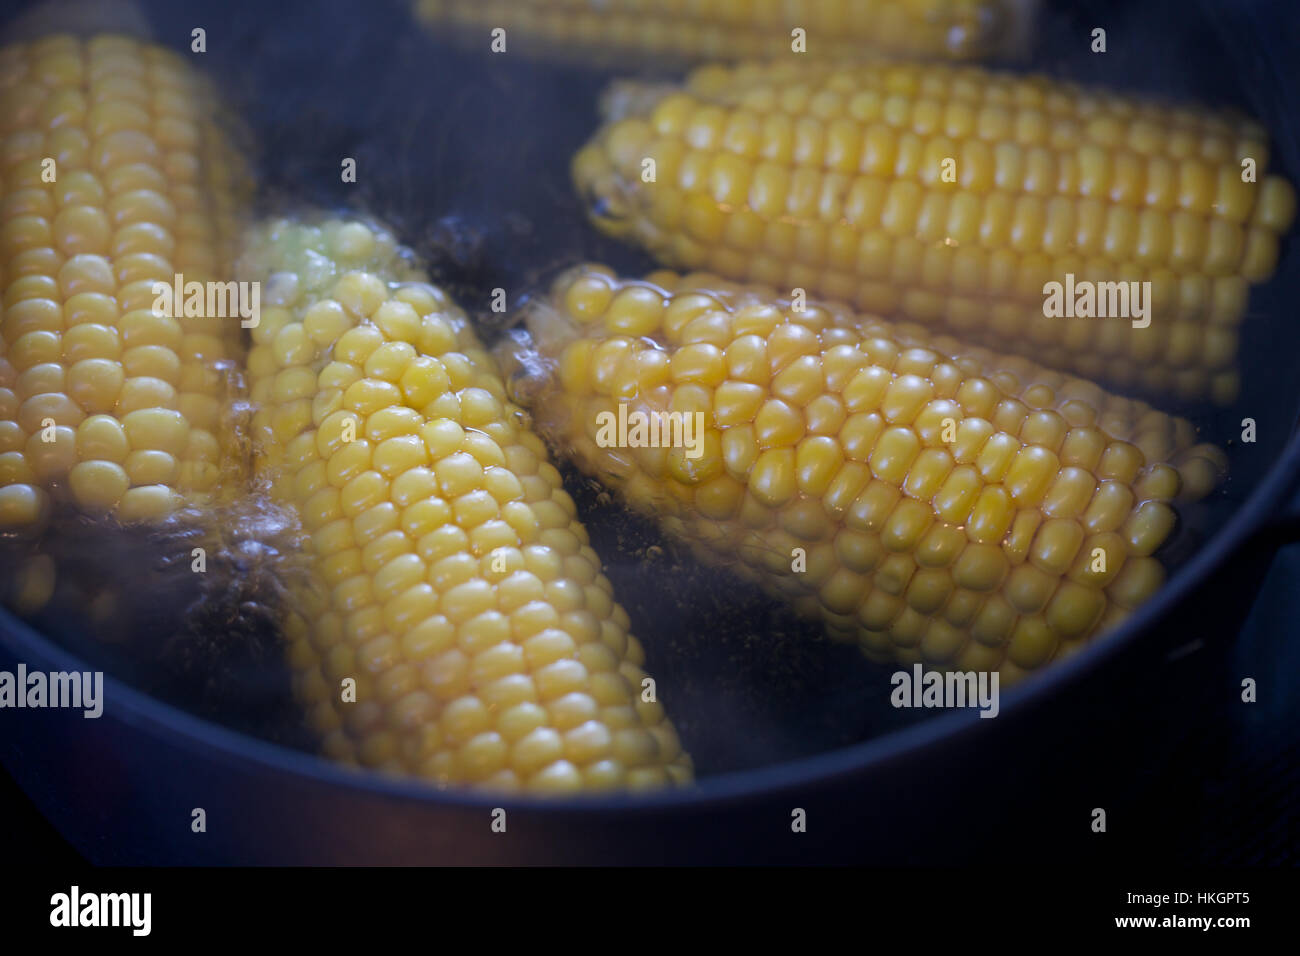 corn in boiling water. maize, pots and pans, vegetable, food . Stock Photo